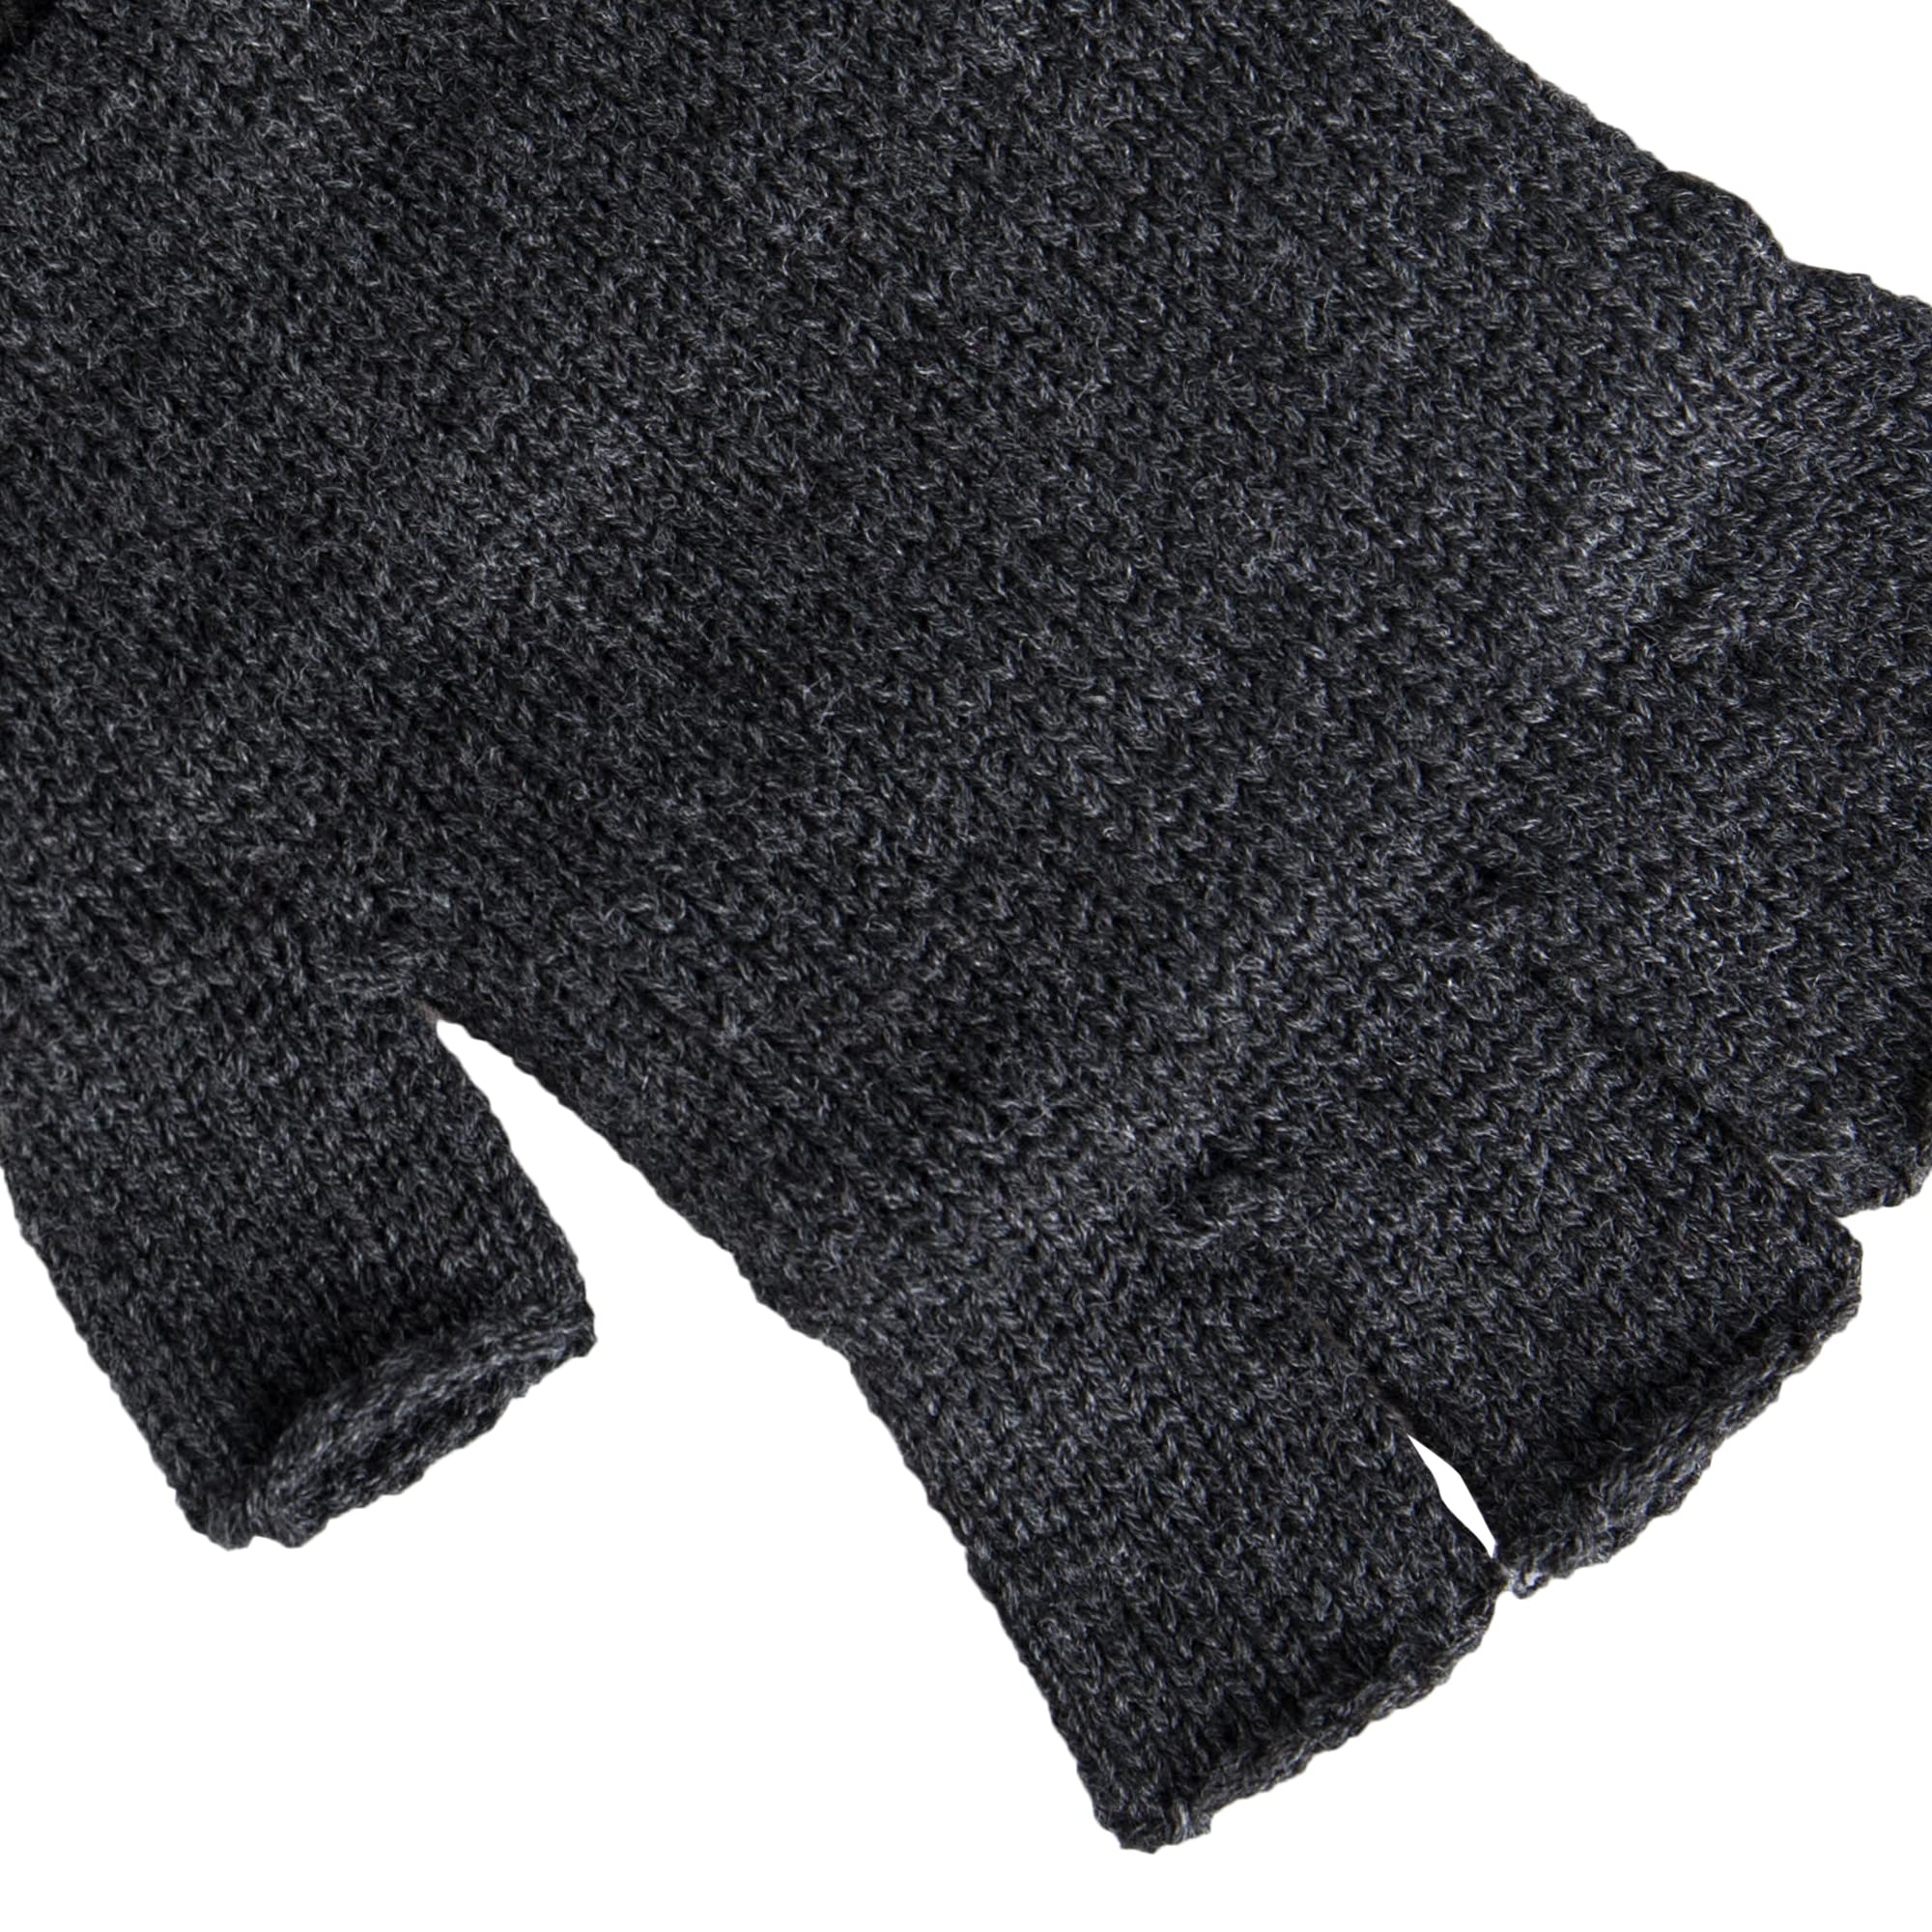 Levi's Men's Reversible Beanie with Fingerless Gloves Set, Charcoal/Black, One Size